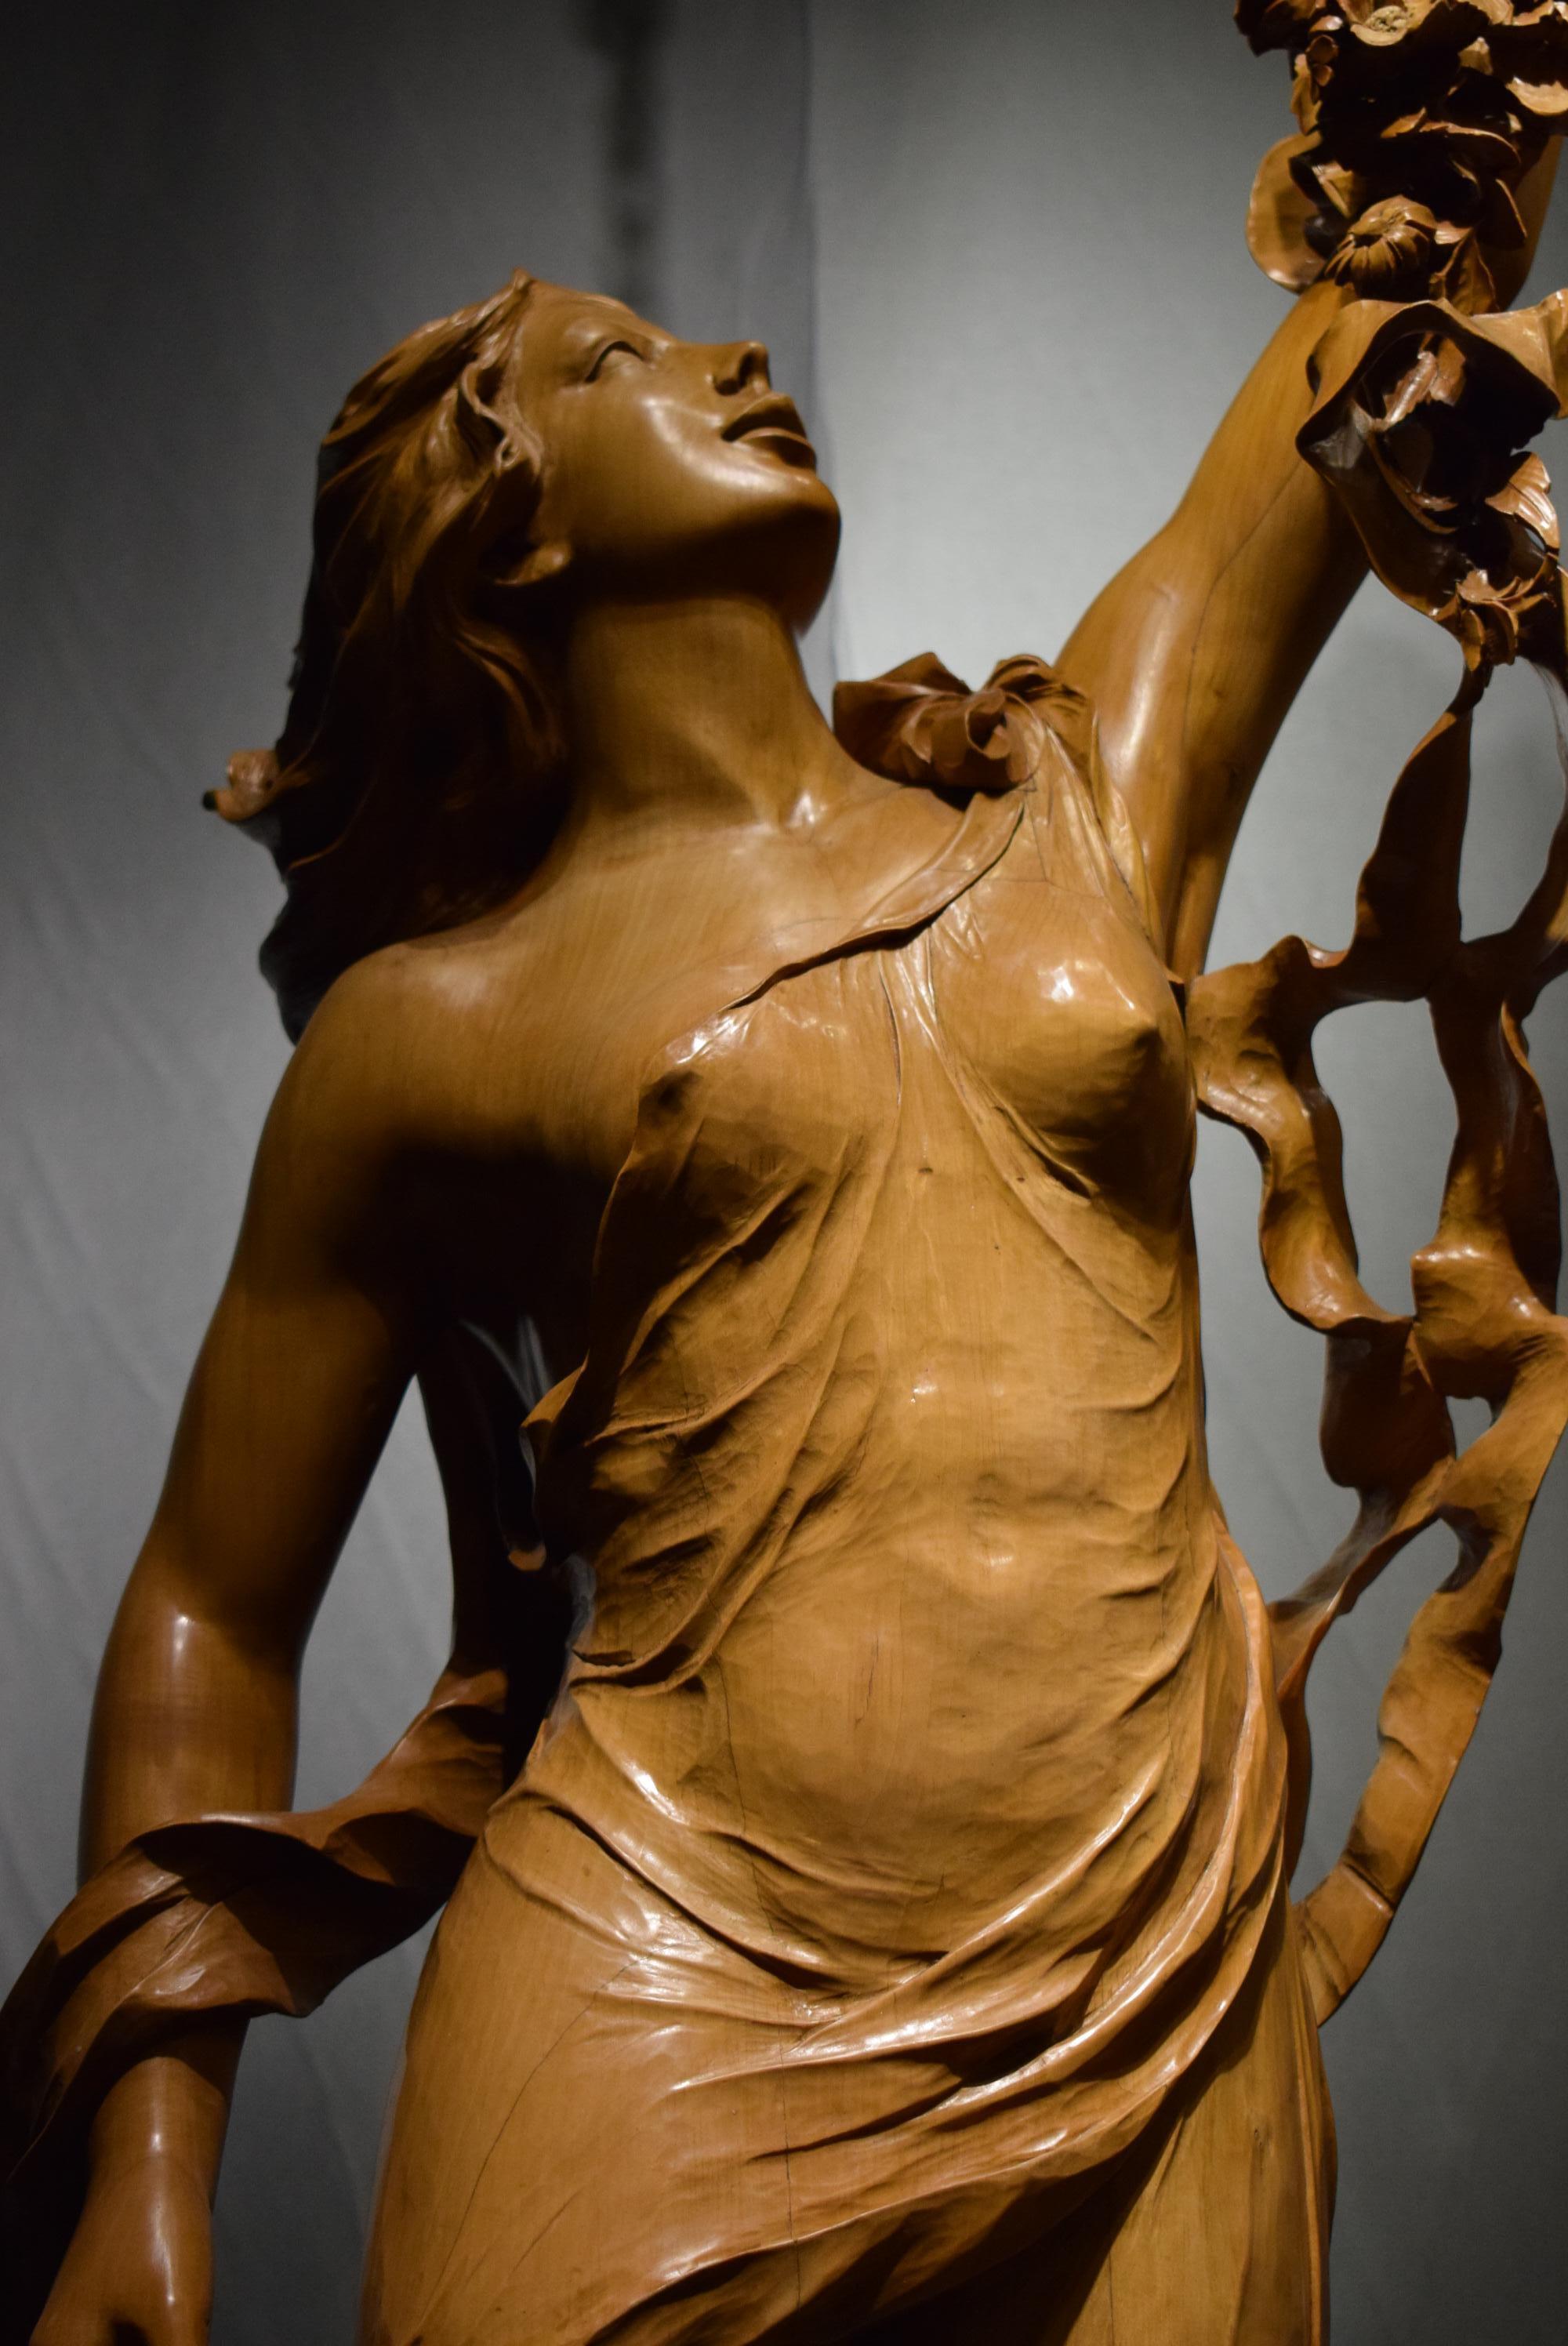 Magnificent limewood sculpture of a maiden dressed in classical garments, holding a clock. Extraordinary carving. The detail of hair, garment, and ribbons in the wood are the work of a master carver.
Height (Overall) 93